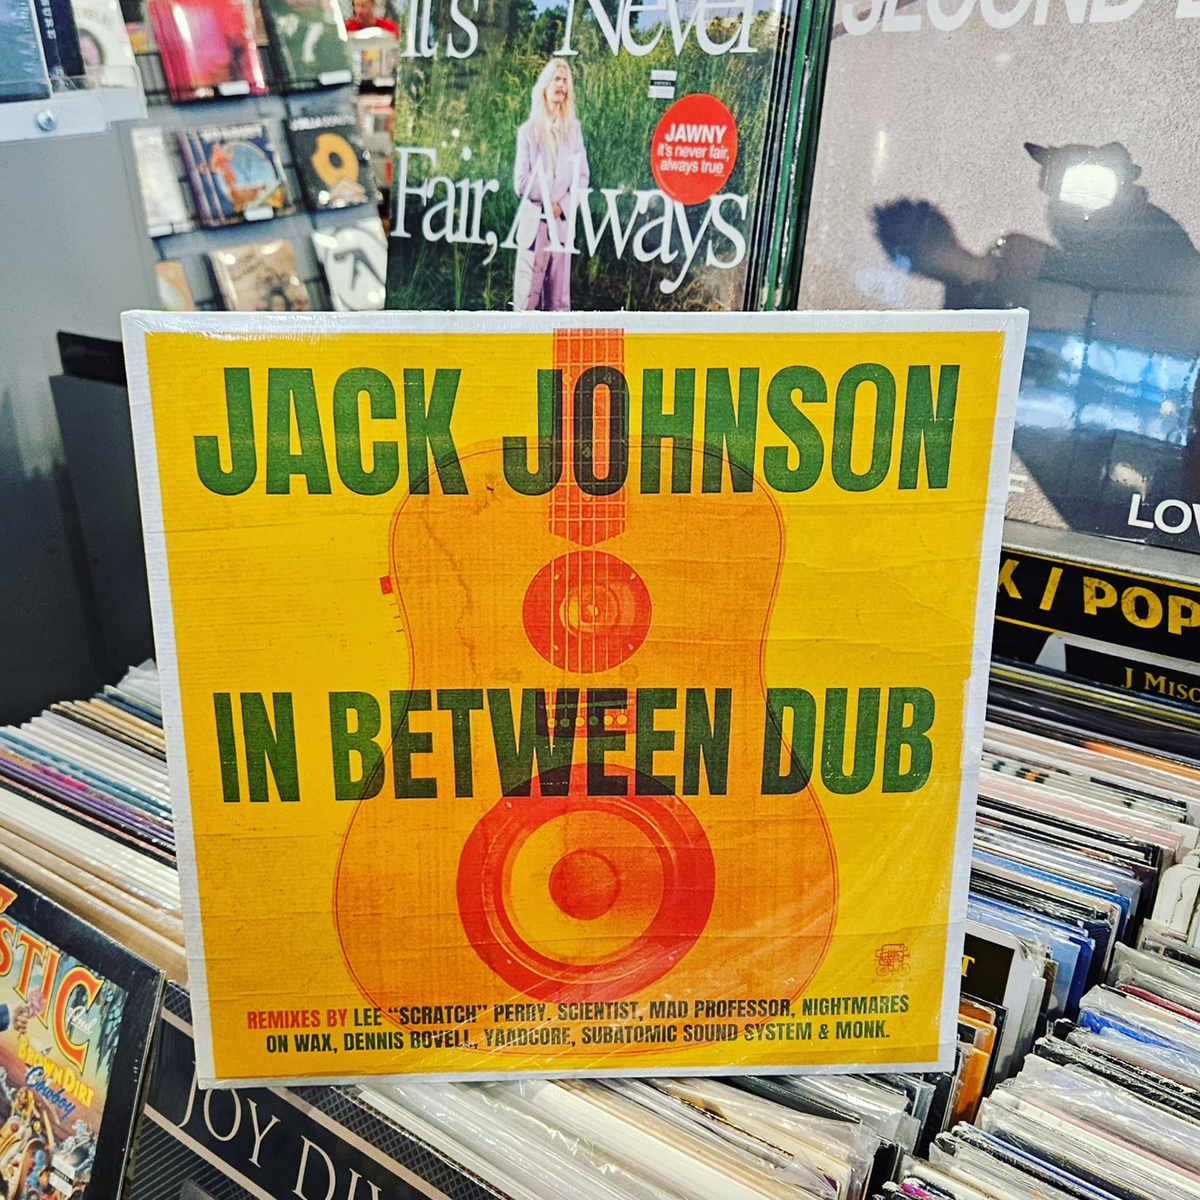 .@jackjohnson has released a new dub remix album featuring remixes by @ScratchLee, @nightmaresonwax, @MadProfessordub, Scientist & more. 'In Between Dub' is out now via @RepublicRecords on CD and indie exclusive milky white vinyl. Get it here: bit.ly/3oHW64k